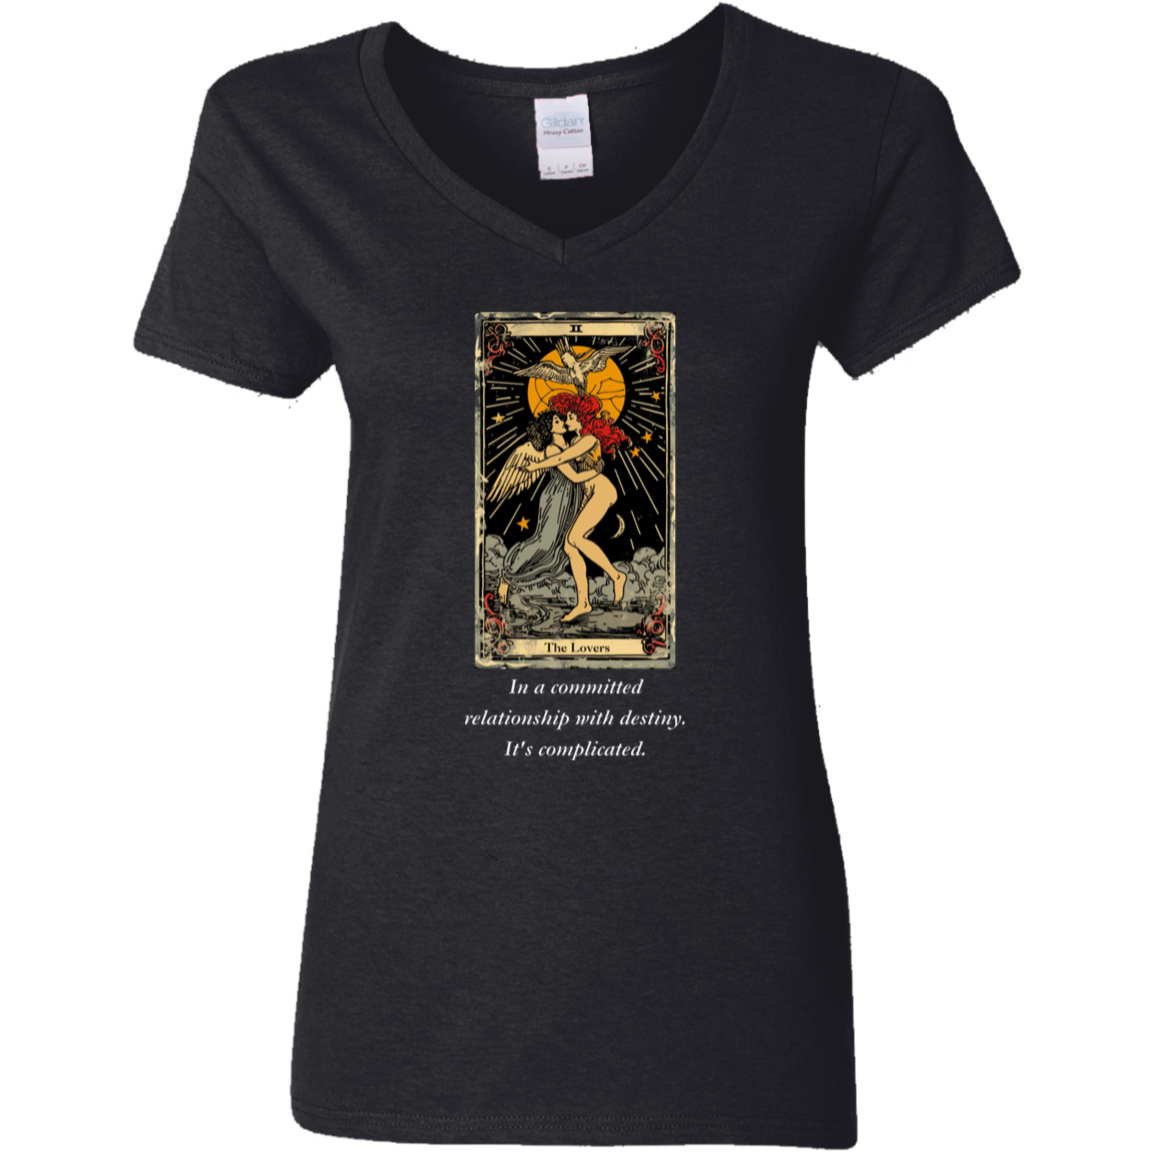 Funny the lovers women's black tarot card T shirt from BLK Moon Shop